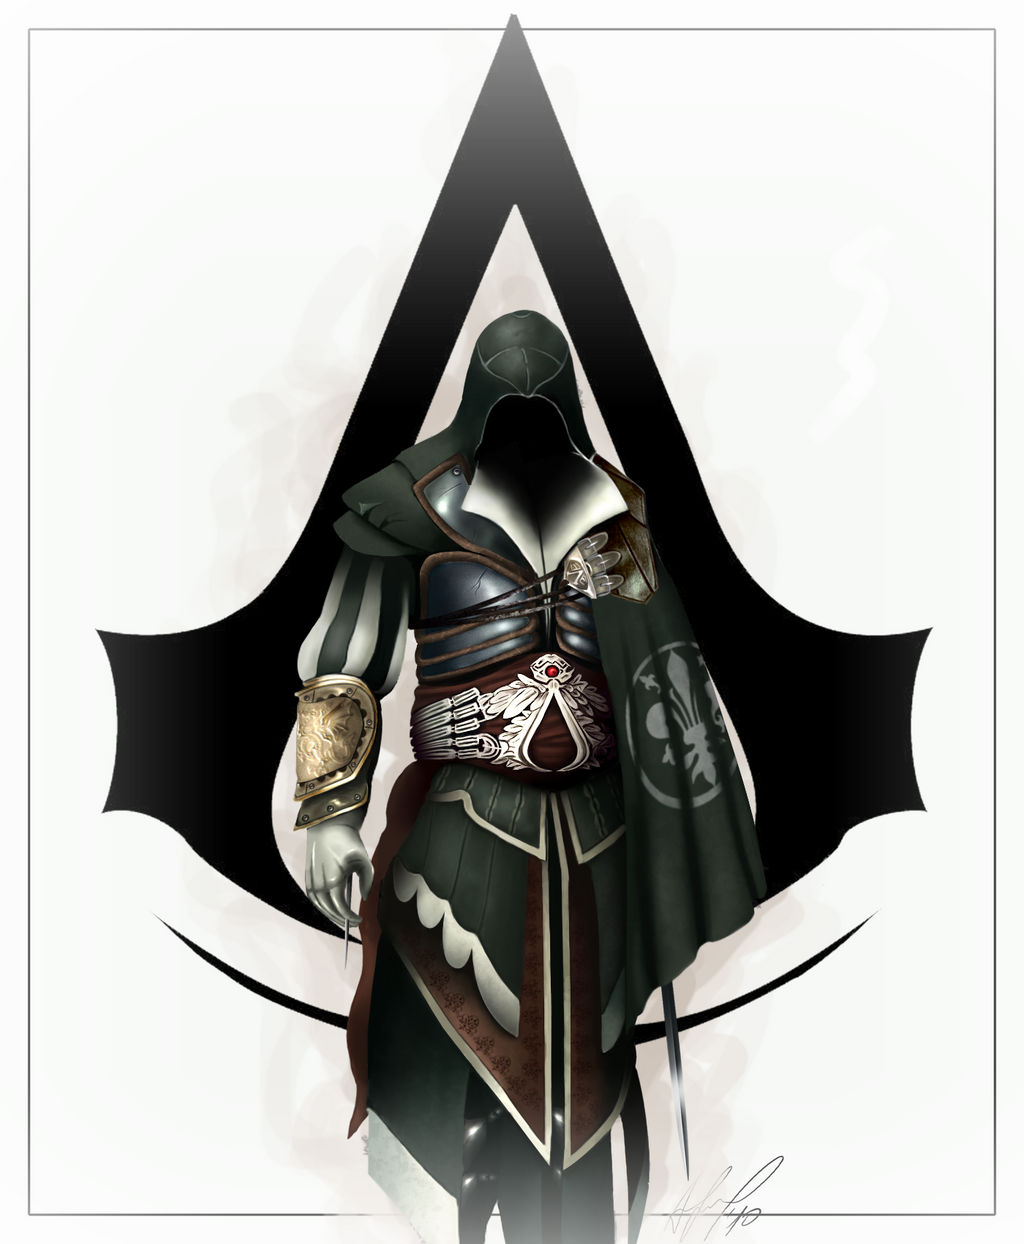 Assassin's Creed Revelations Altaïr outfit recolor to Black 